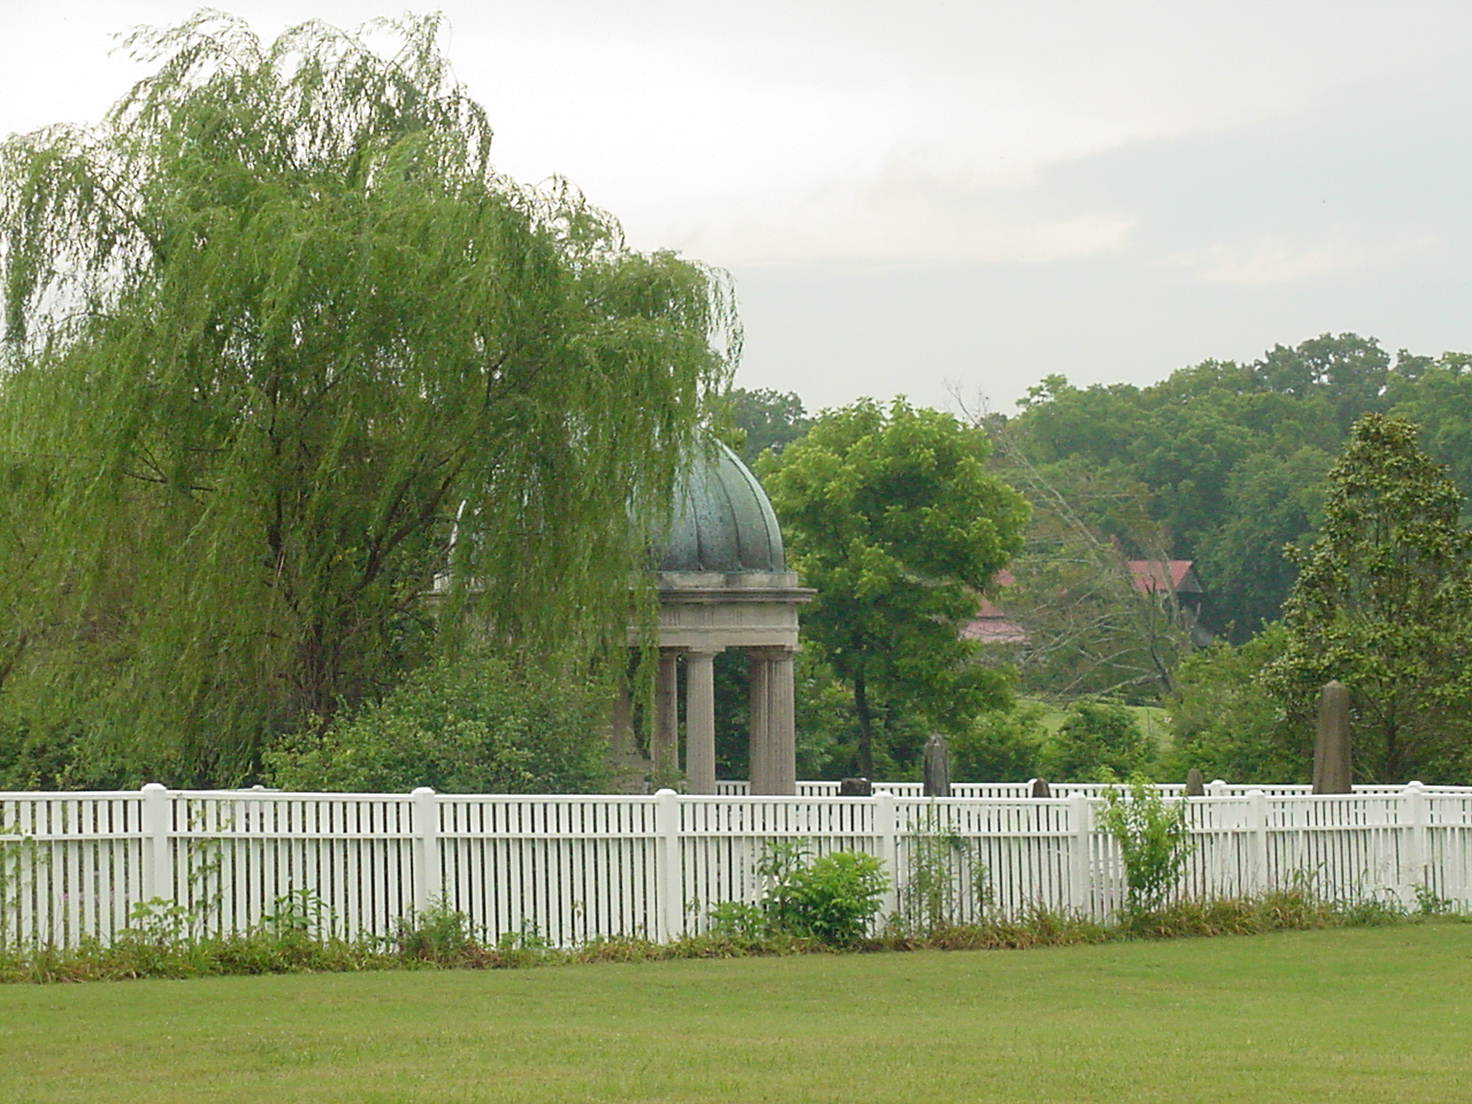 The area behind the fence is the Jackson Family graveyard, which I will visit after seeing the interior of the home.